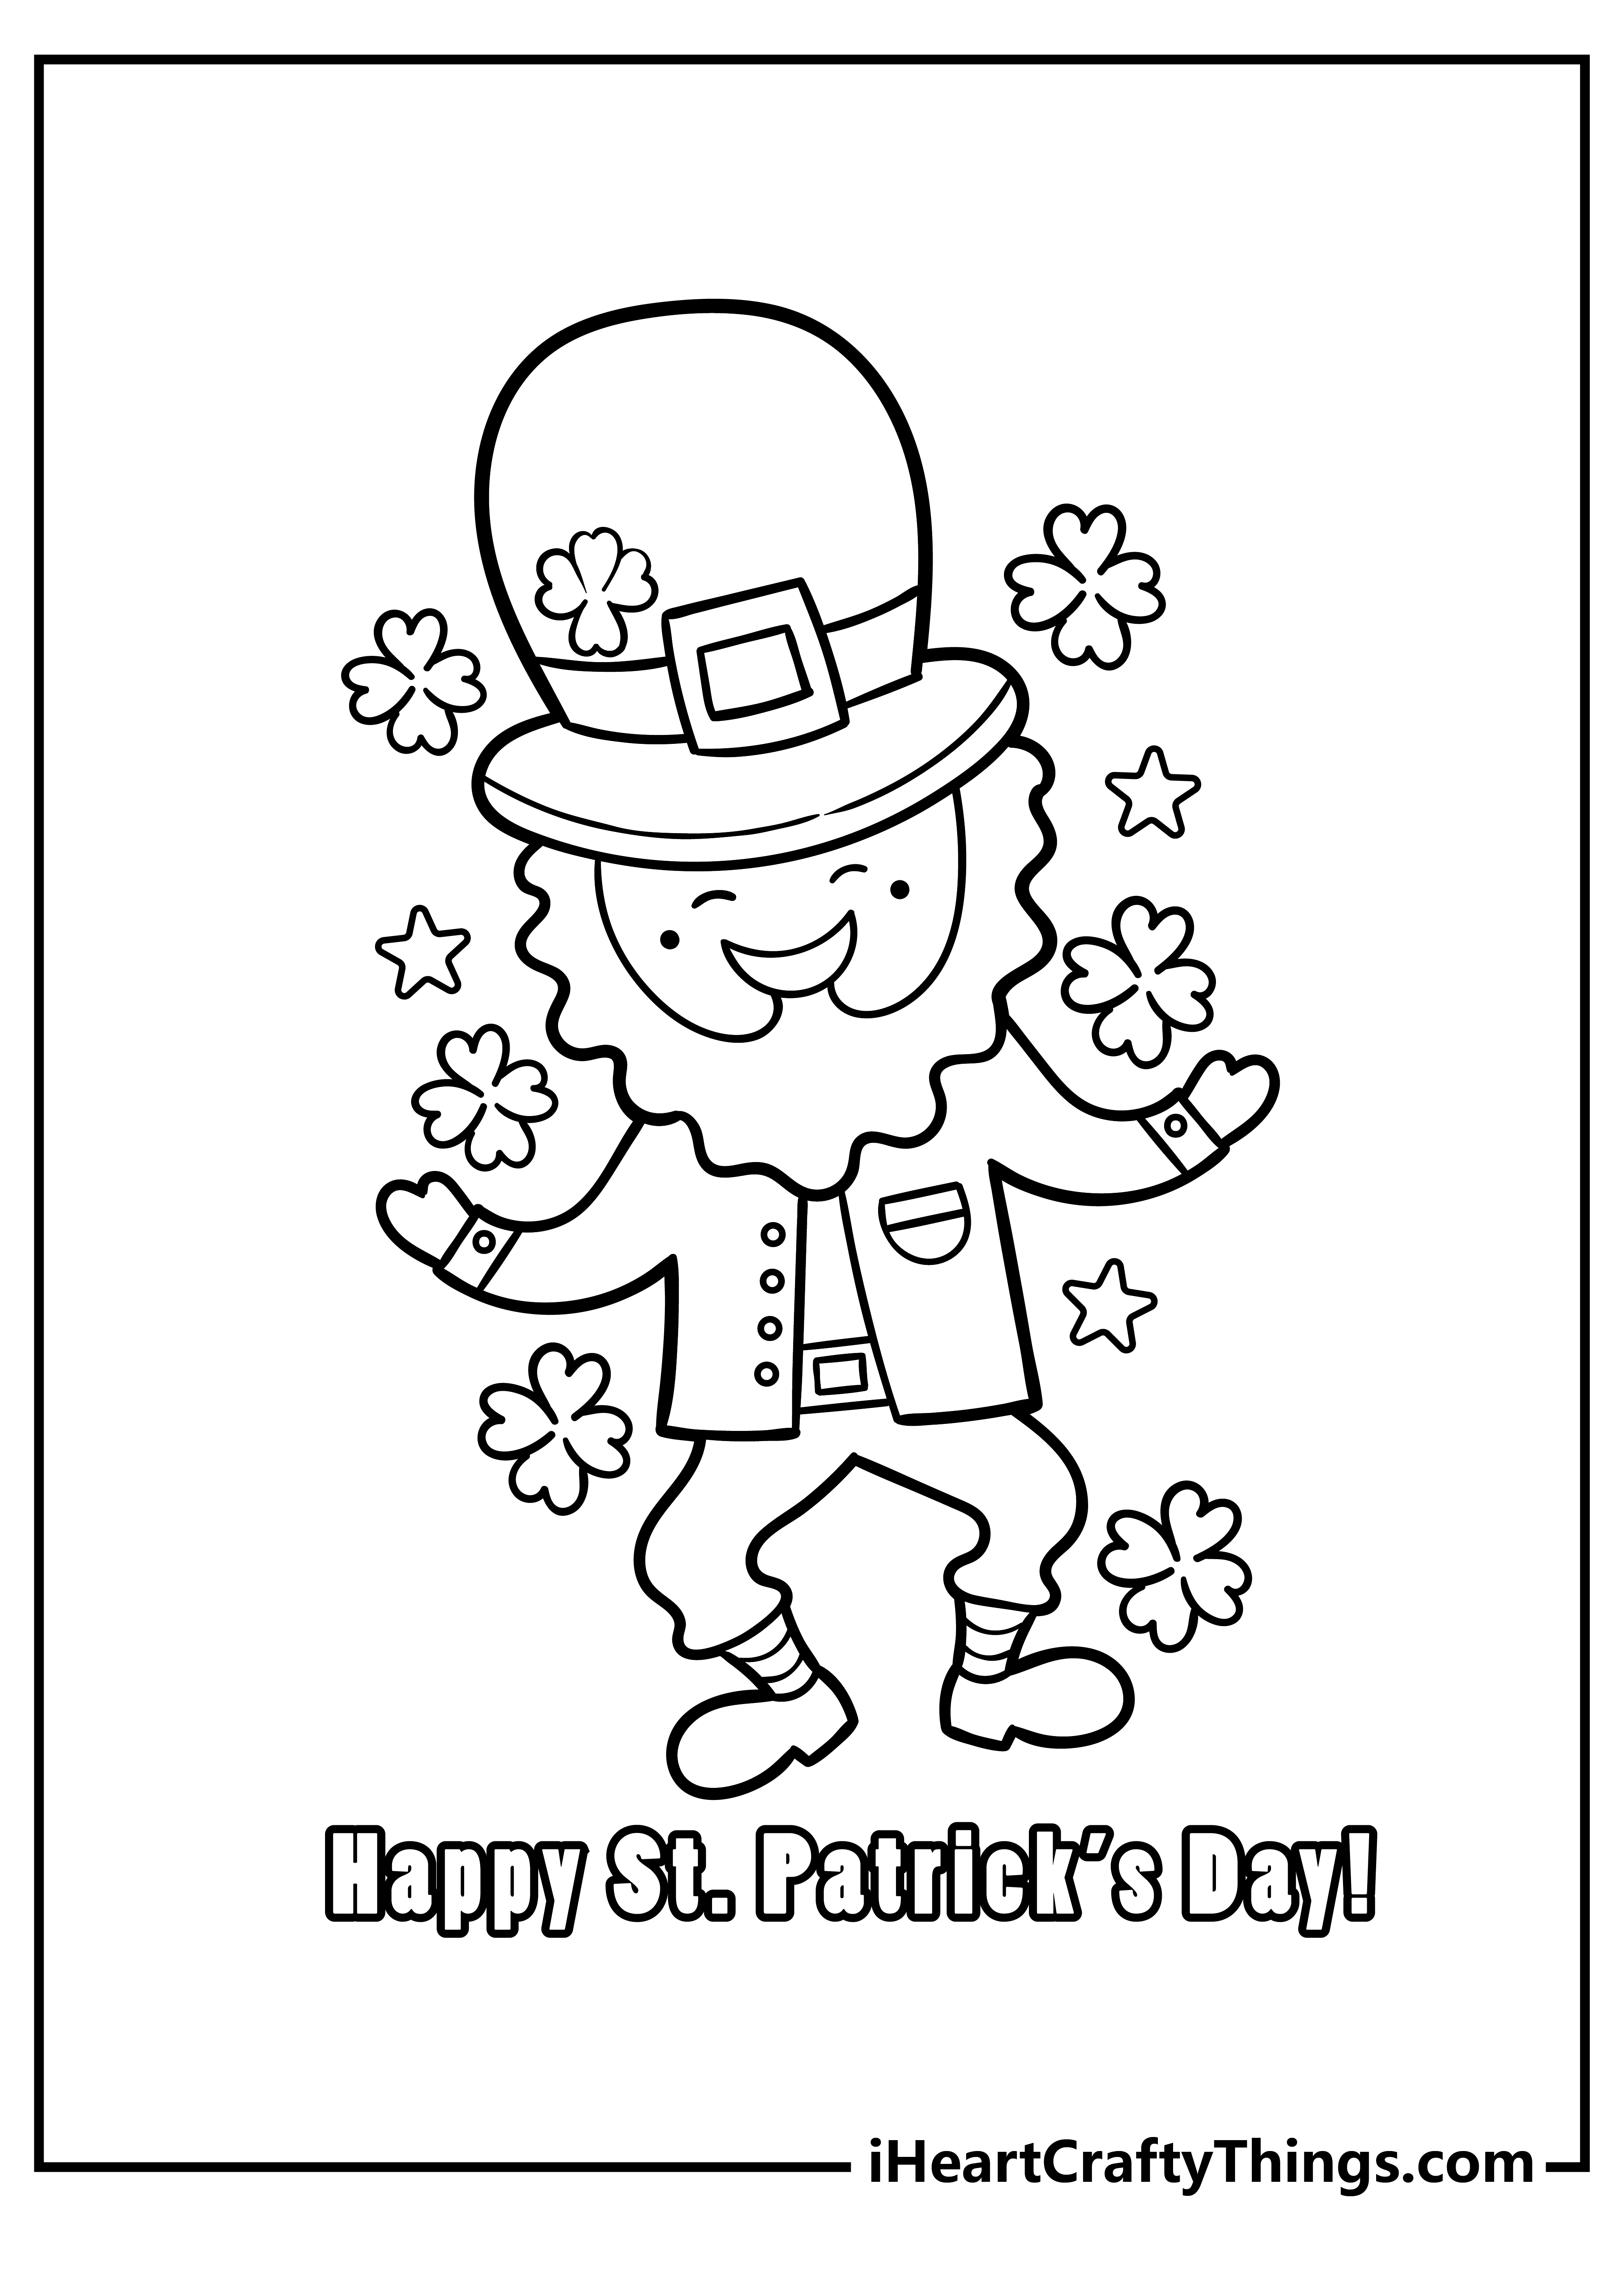 St Patrick’s Day Coloring Book free printable